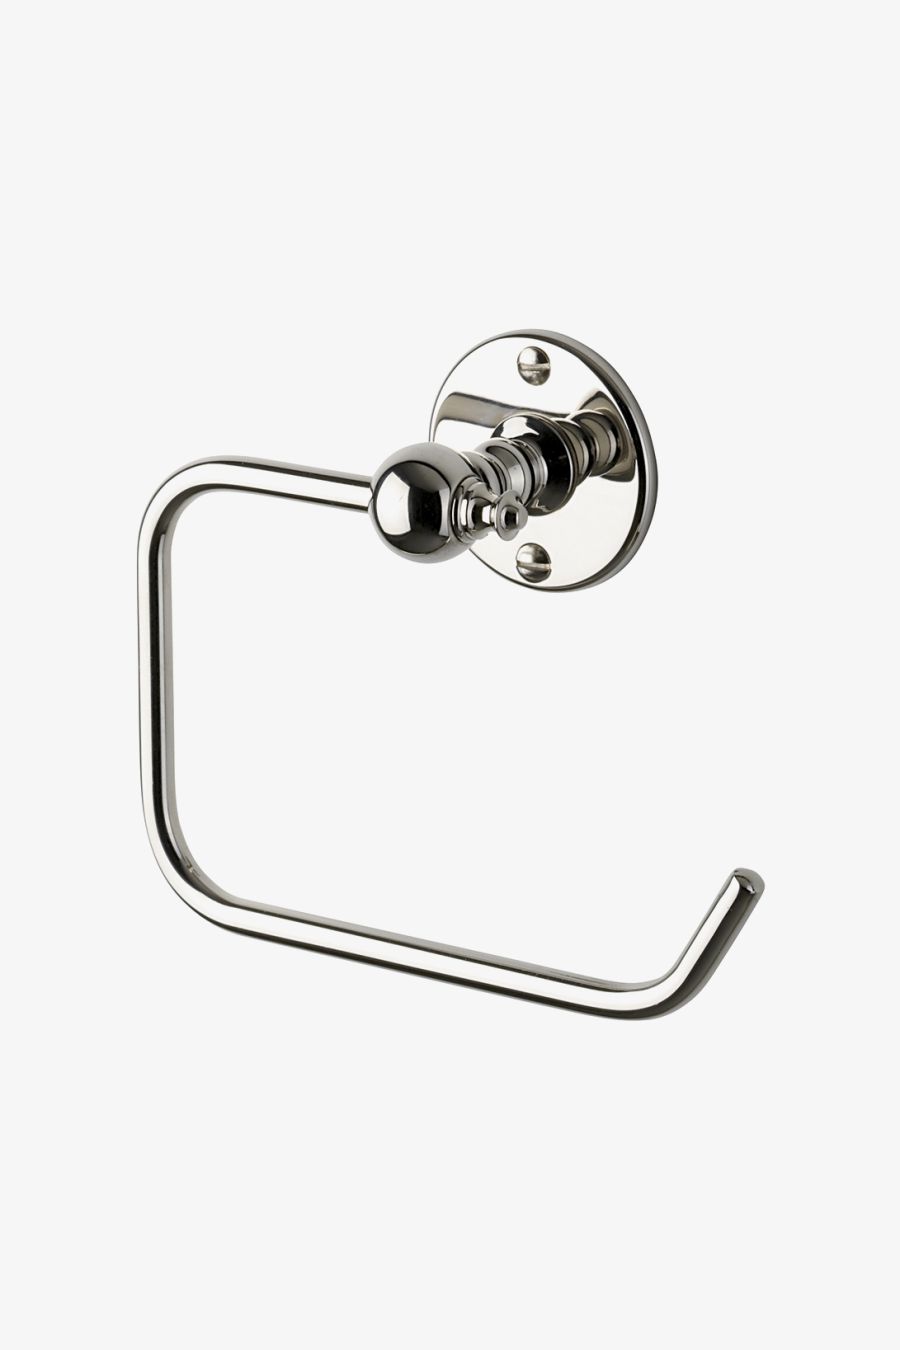 RuiLing Wall Mounted Single Arm Toilet Paper Holder in Stainless Steel Silver ATK-196